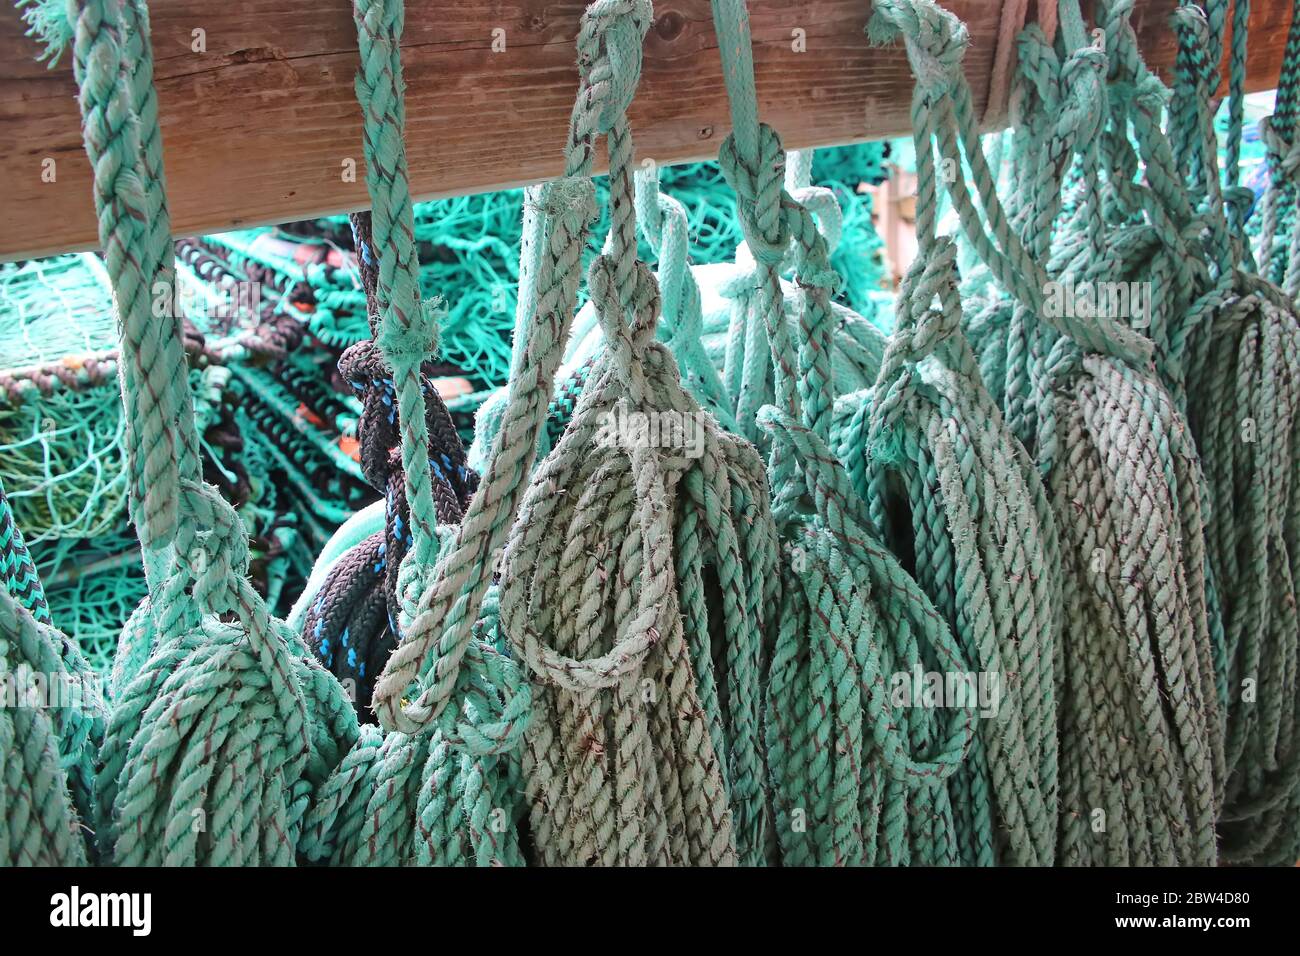 Close up of green blue turquiose rope Hanging up on wood used for fishing or sailing, Norway. Stock Photo